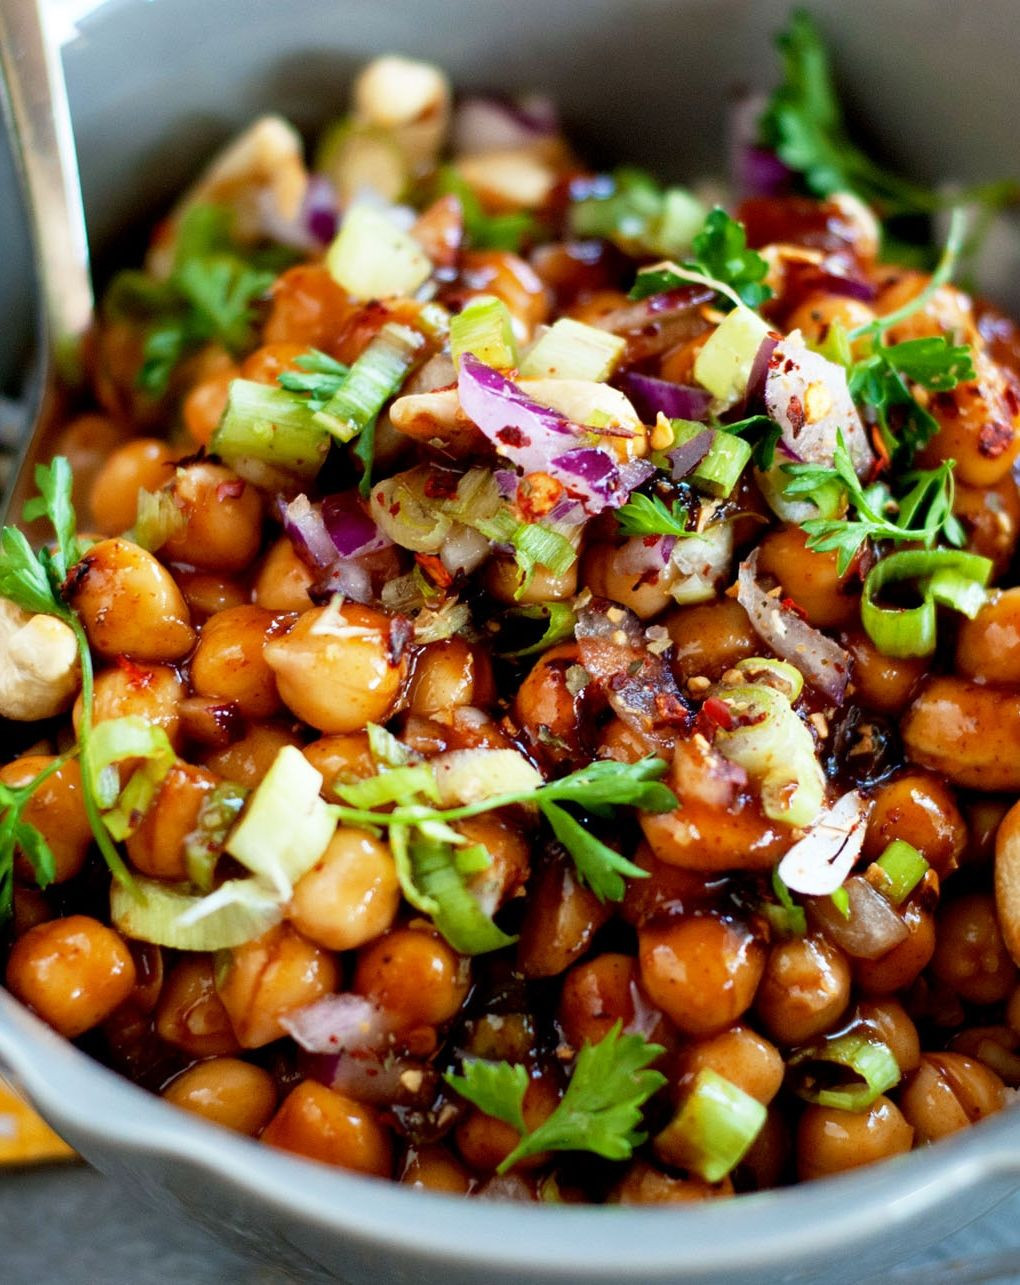 Vegan Garbanzo Bean Recipes
 Swap the meat with flavorful chickpeas in this classic